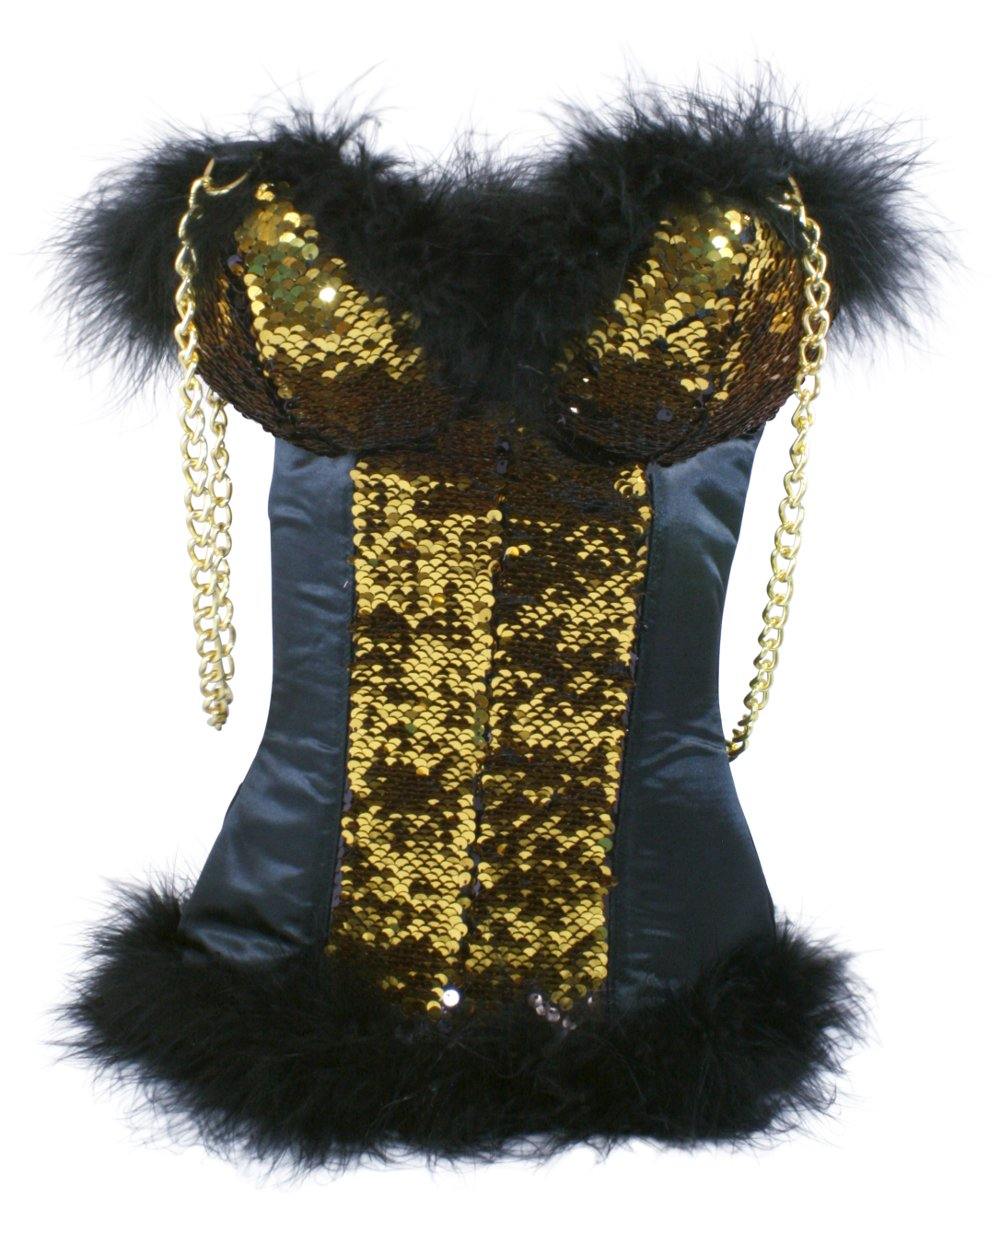 Sexy Corset Tote in Gold/Black reversible Sequins by Tipsy Totes